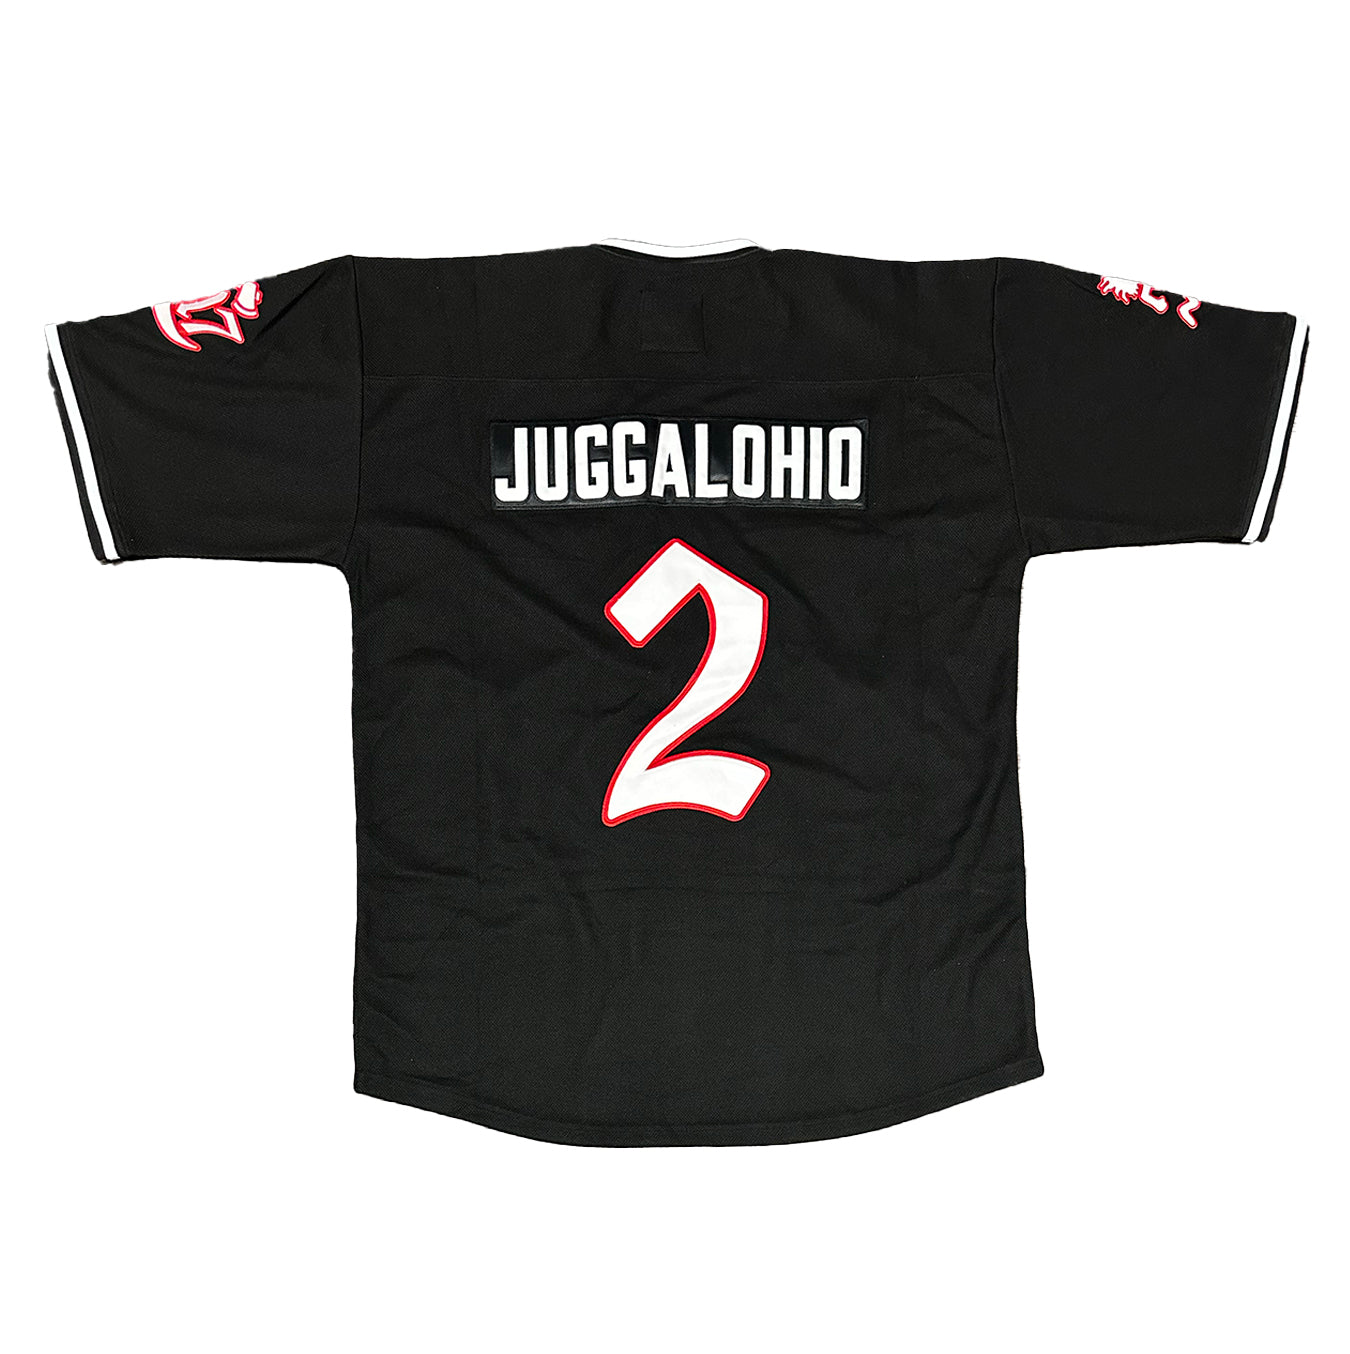 Juggalohio official event Jersey - Black